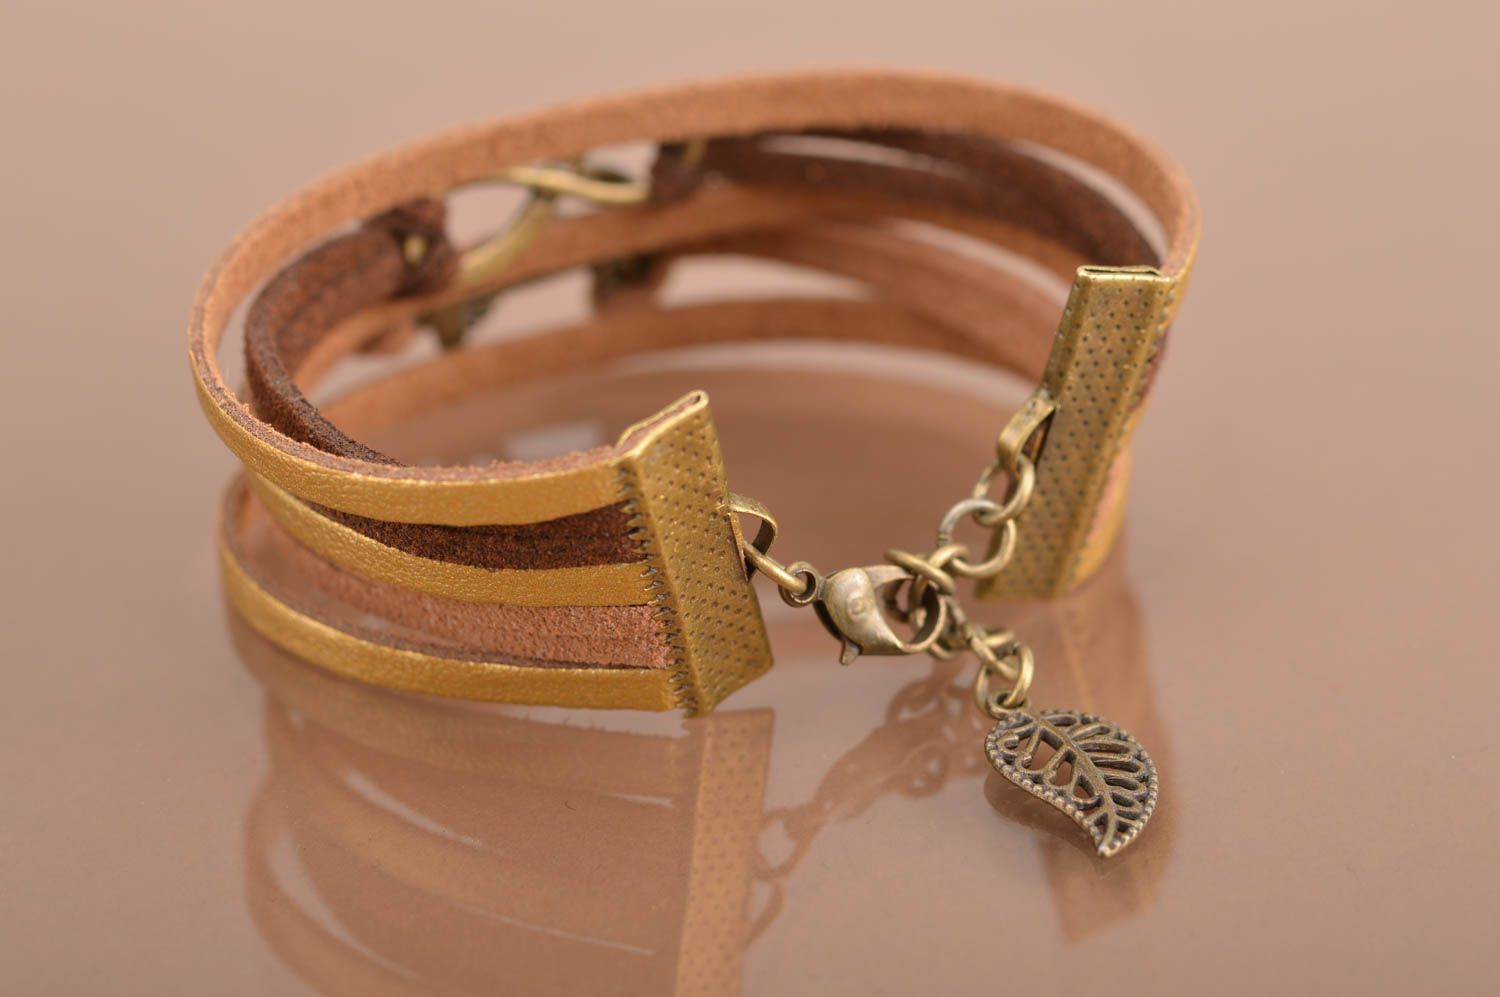 Beautiful homemade suede cord bracelet with metal inserts and charm for girls photo 5